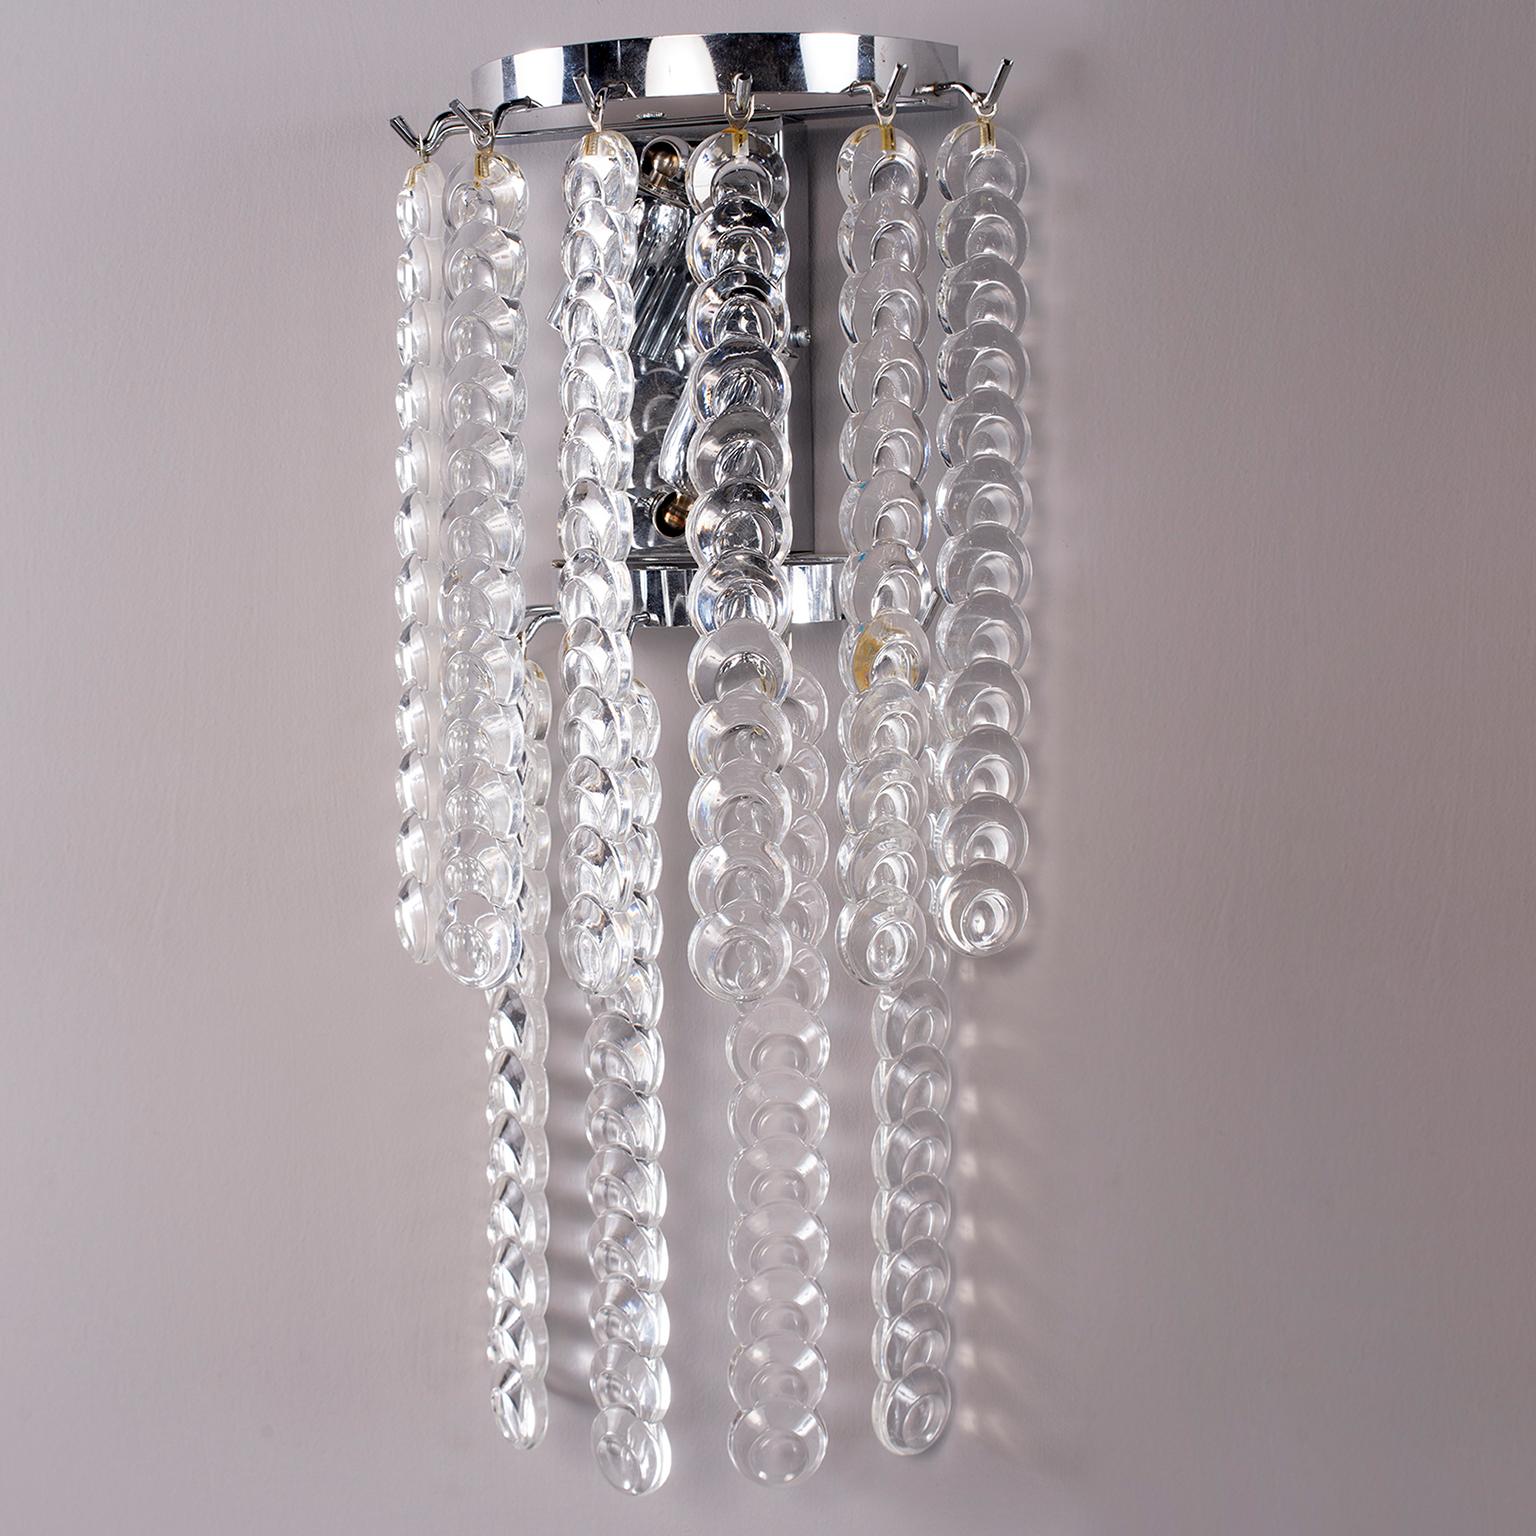 Italian Pair of Murano Glass Sconces with Strands of Clear Glass Disks